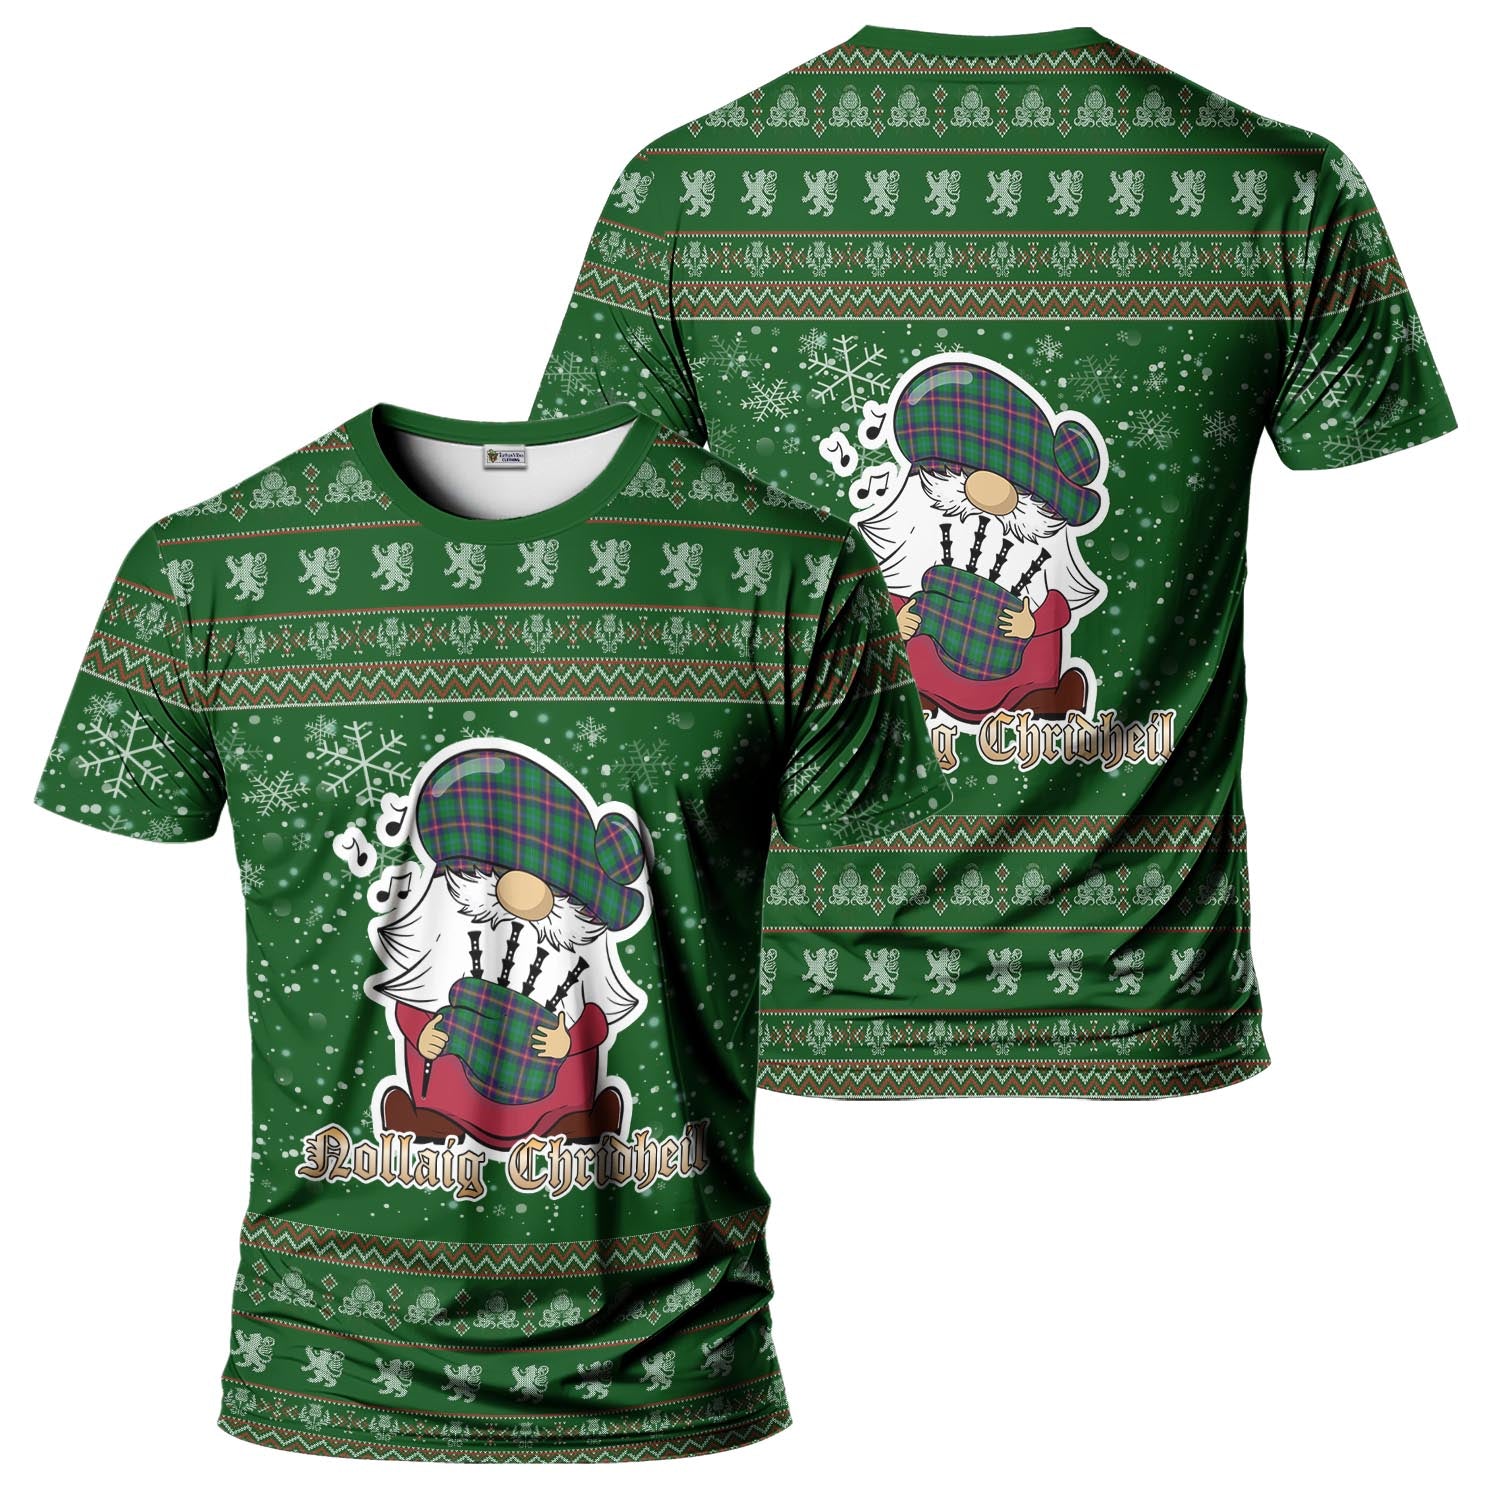 Young Modern Clan Christmas Family T-Shirt with Funny Gnome Playing Bagpipes Men's Shirt Green - Tartanvibesclothing